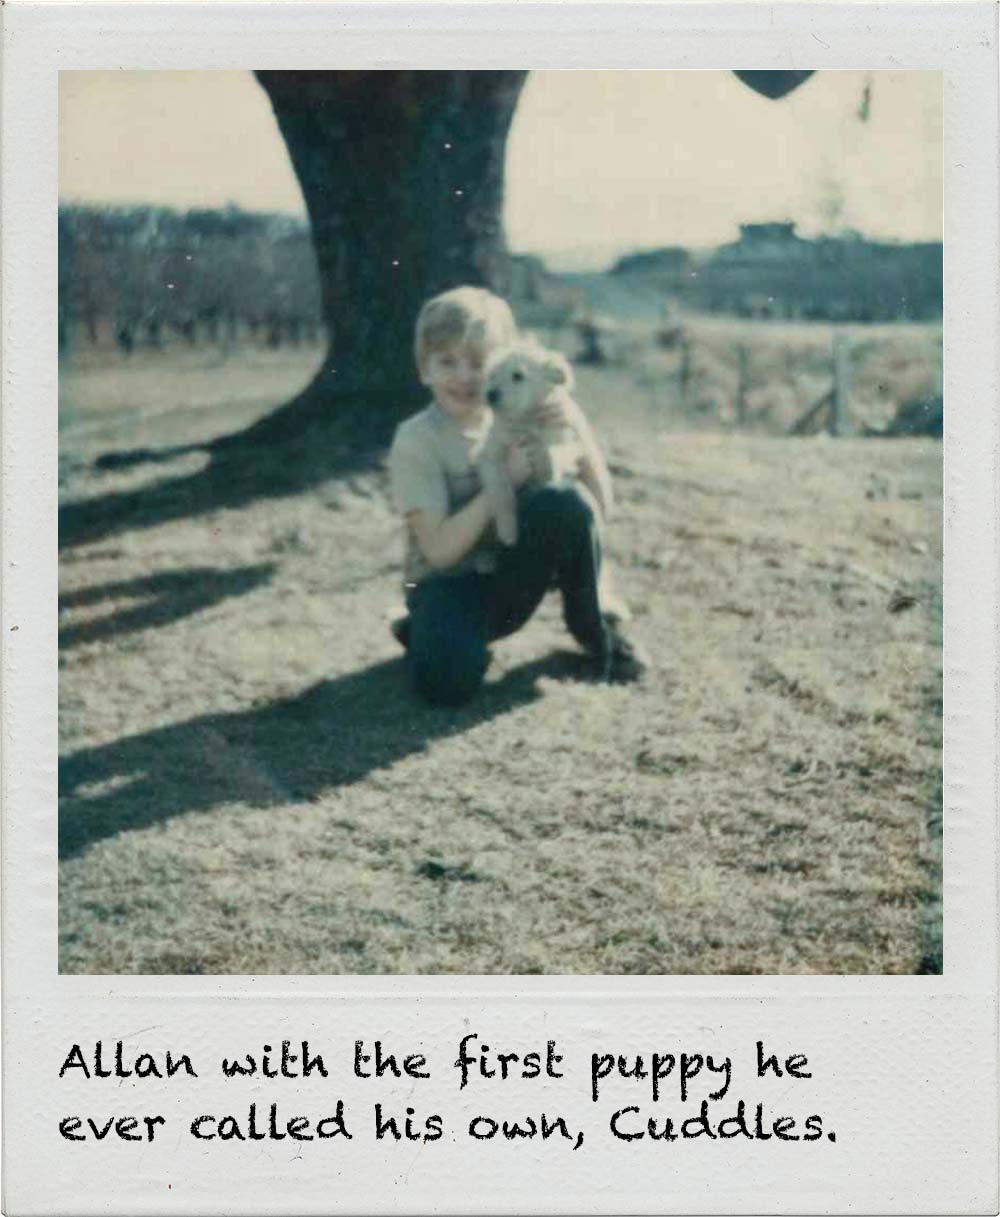 Allan with the first puppy he ever called his own, Cuddles.